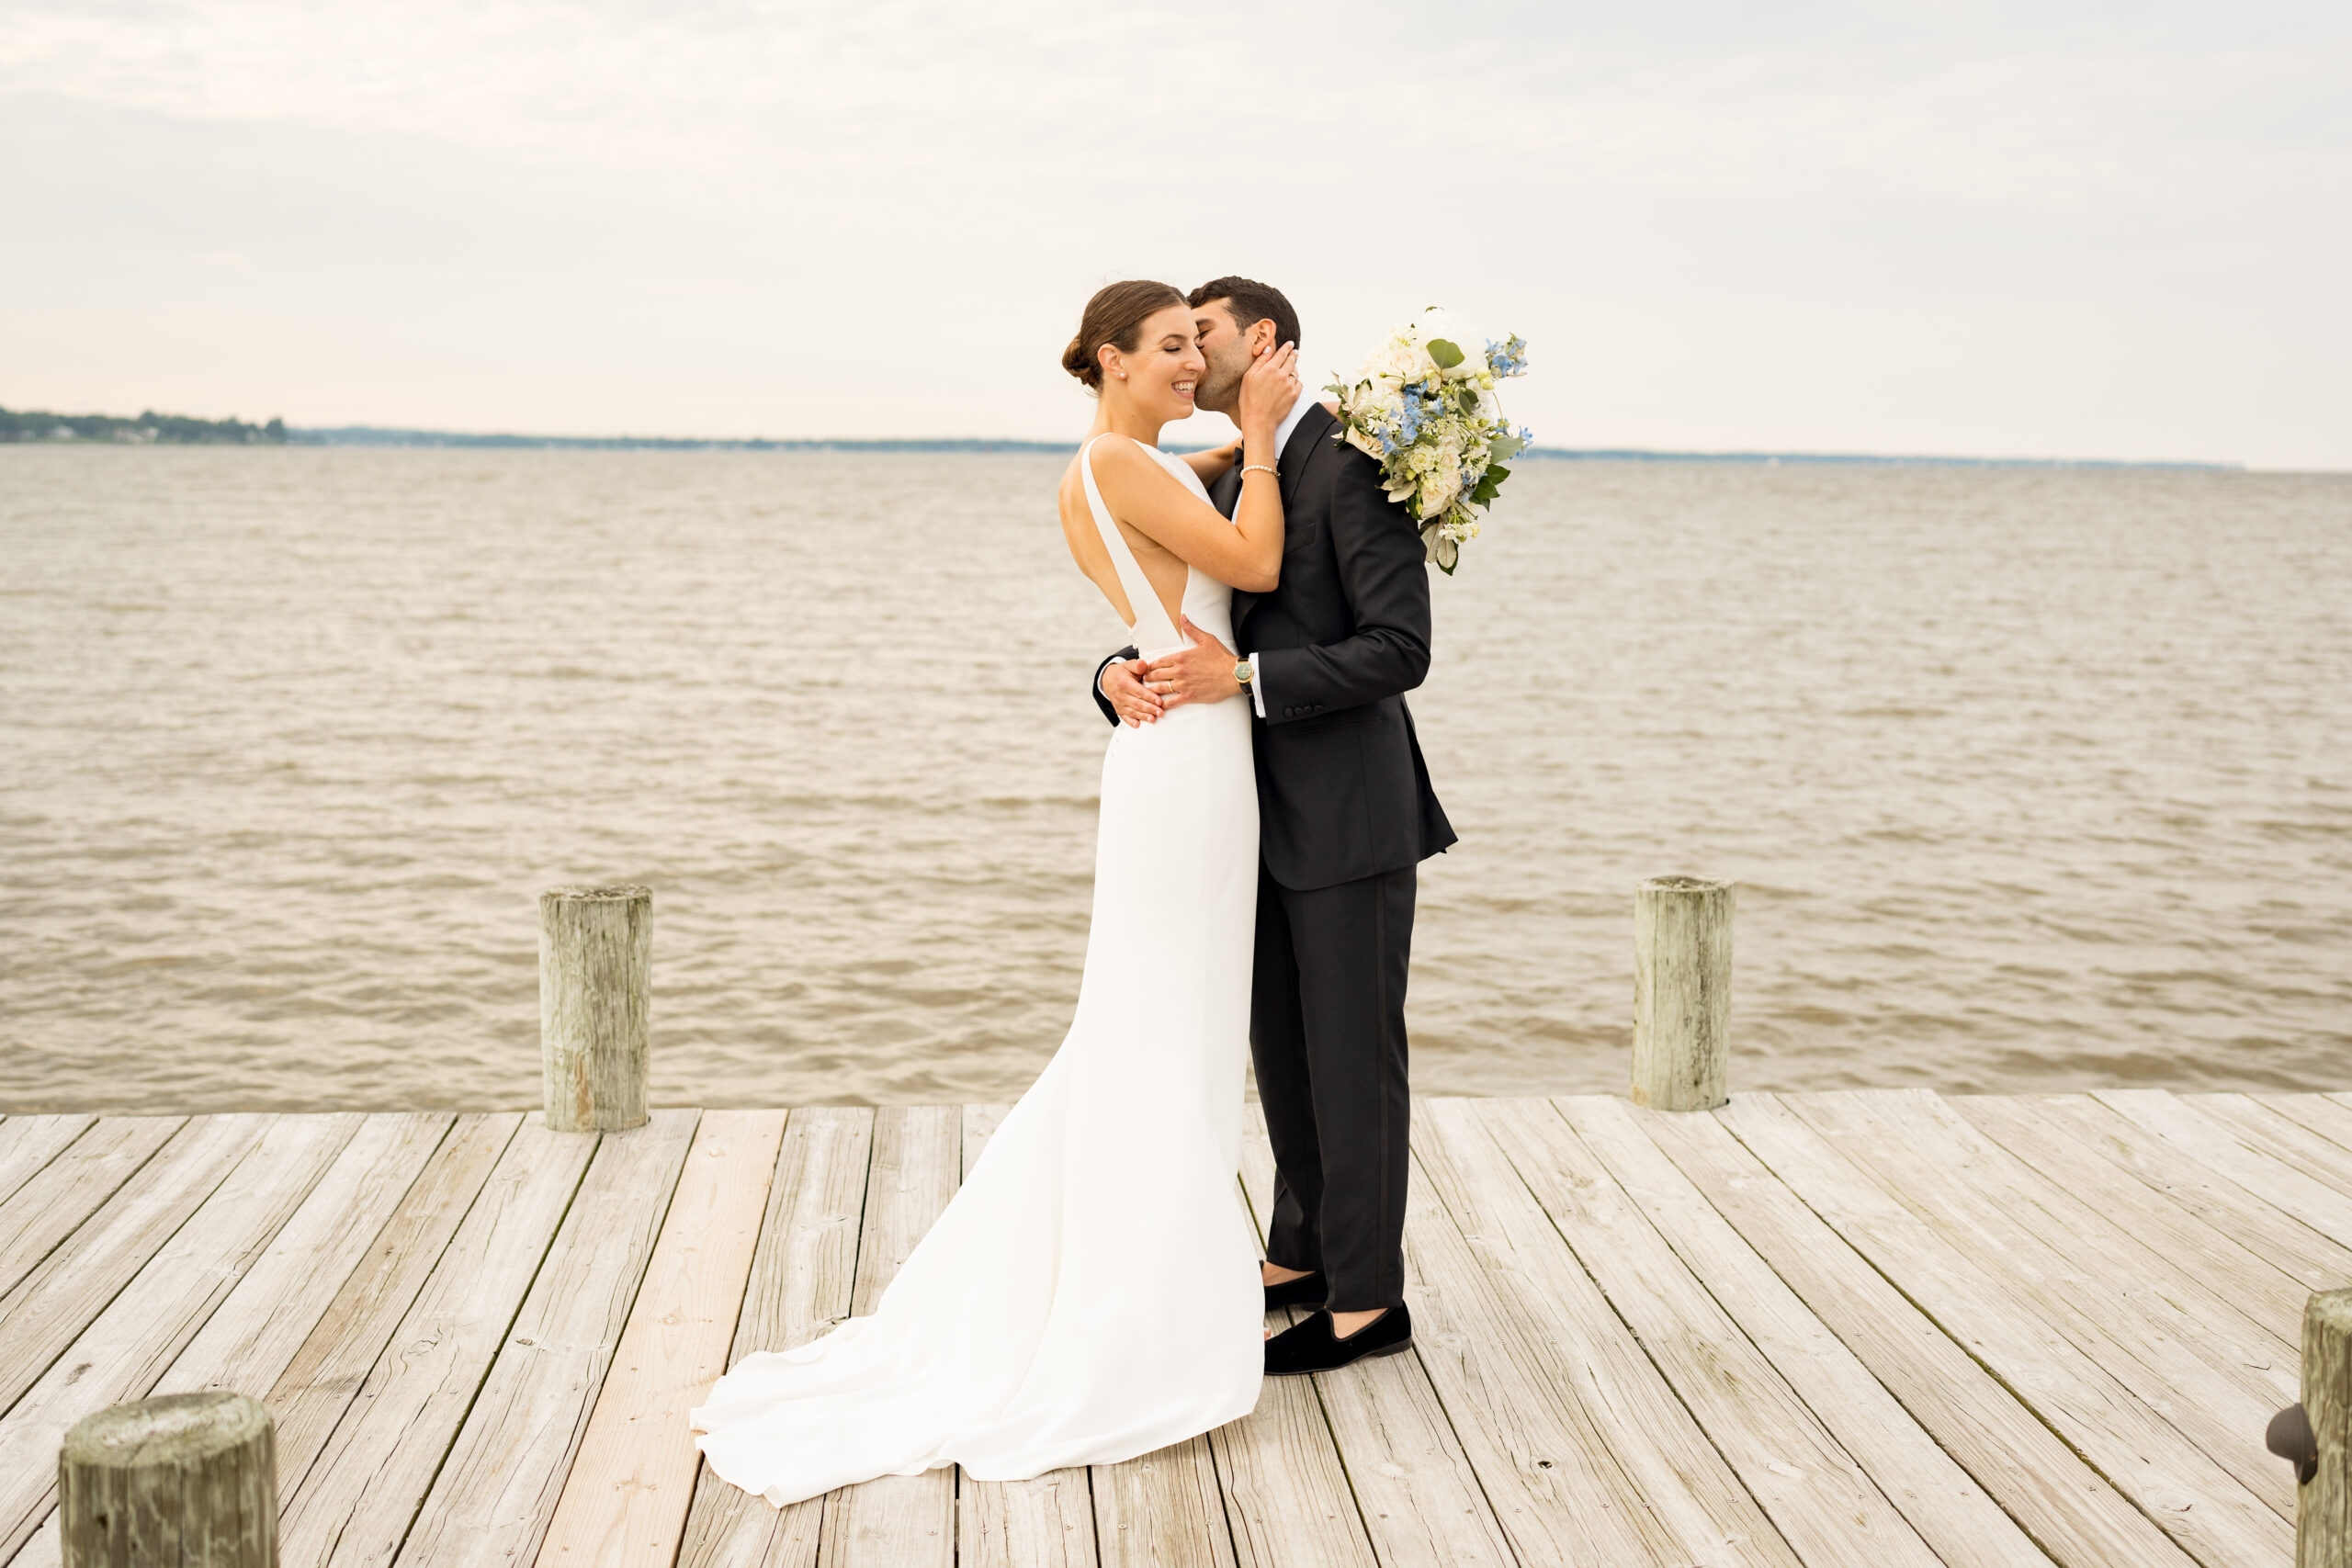 Emma and Fady had their traditional wedding ceremony and reception at the Polynesian Lawn and Paradise Ballroom at Herrington on the Bay. Herrington is a coastal wedding venue on Chesapeake Bay. These photos show the happy couple on the dock at the venue.